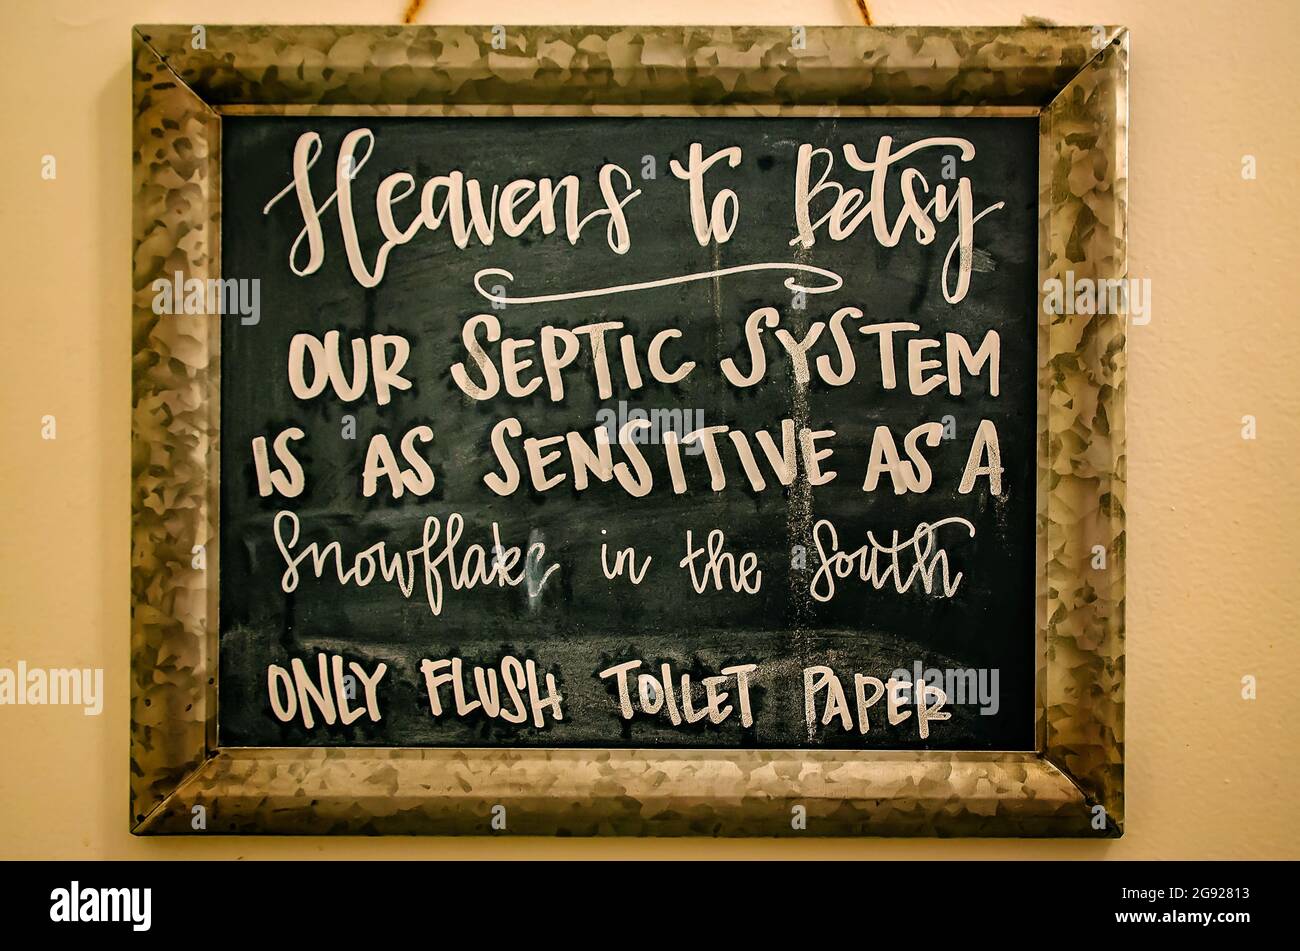 A humorous bathroom sign reminds customers to only flush toilet paper in the restroom at Mo’ Bay Beignet Co., July 23, 2021, in Mobile, Alabama. Stock Photo